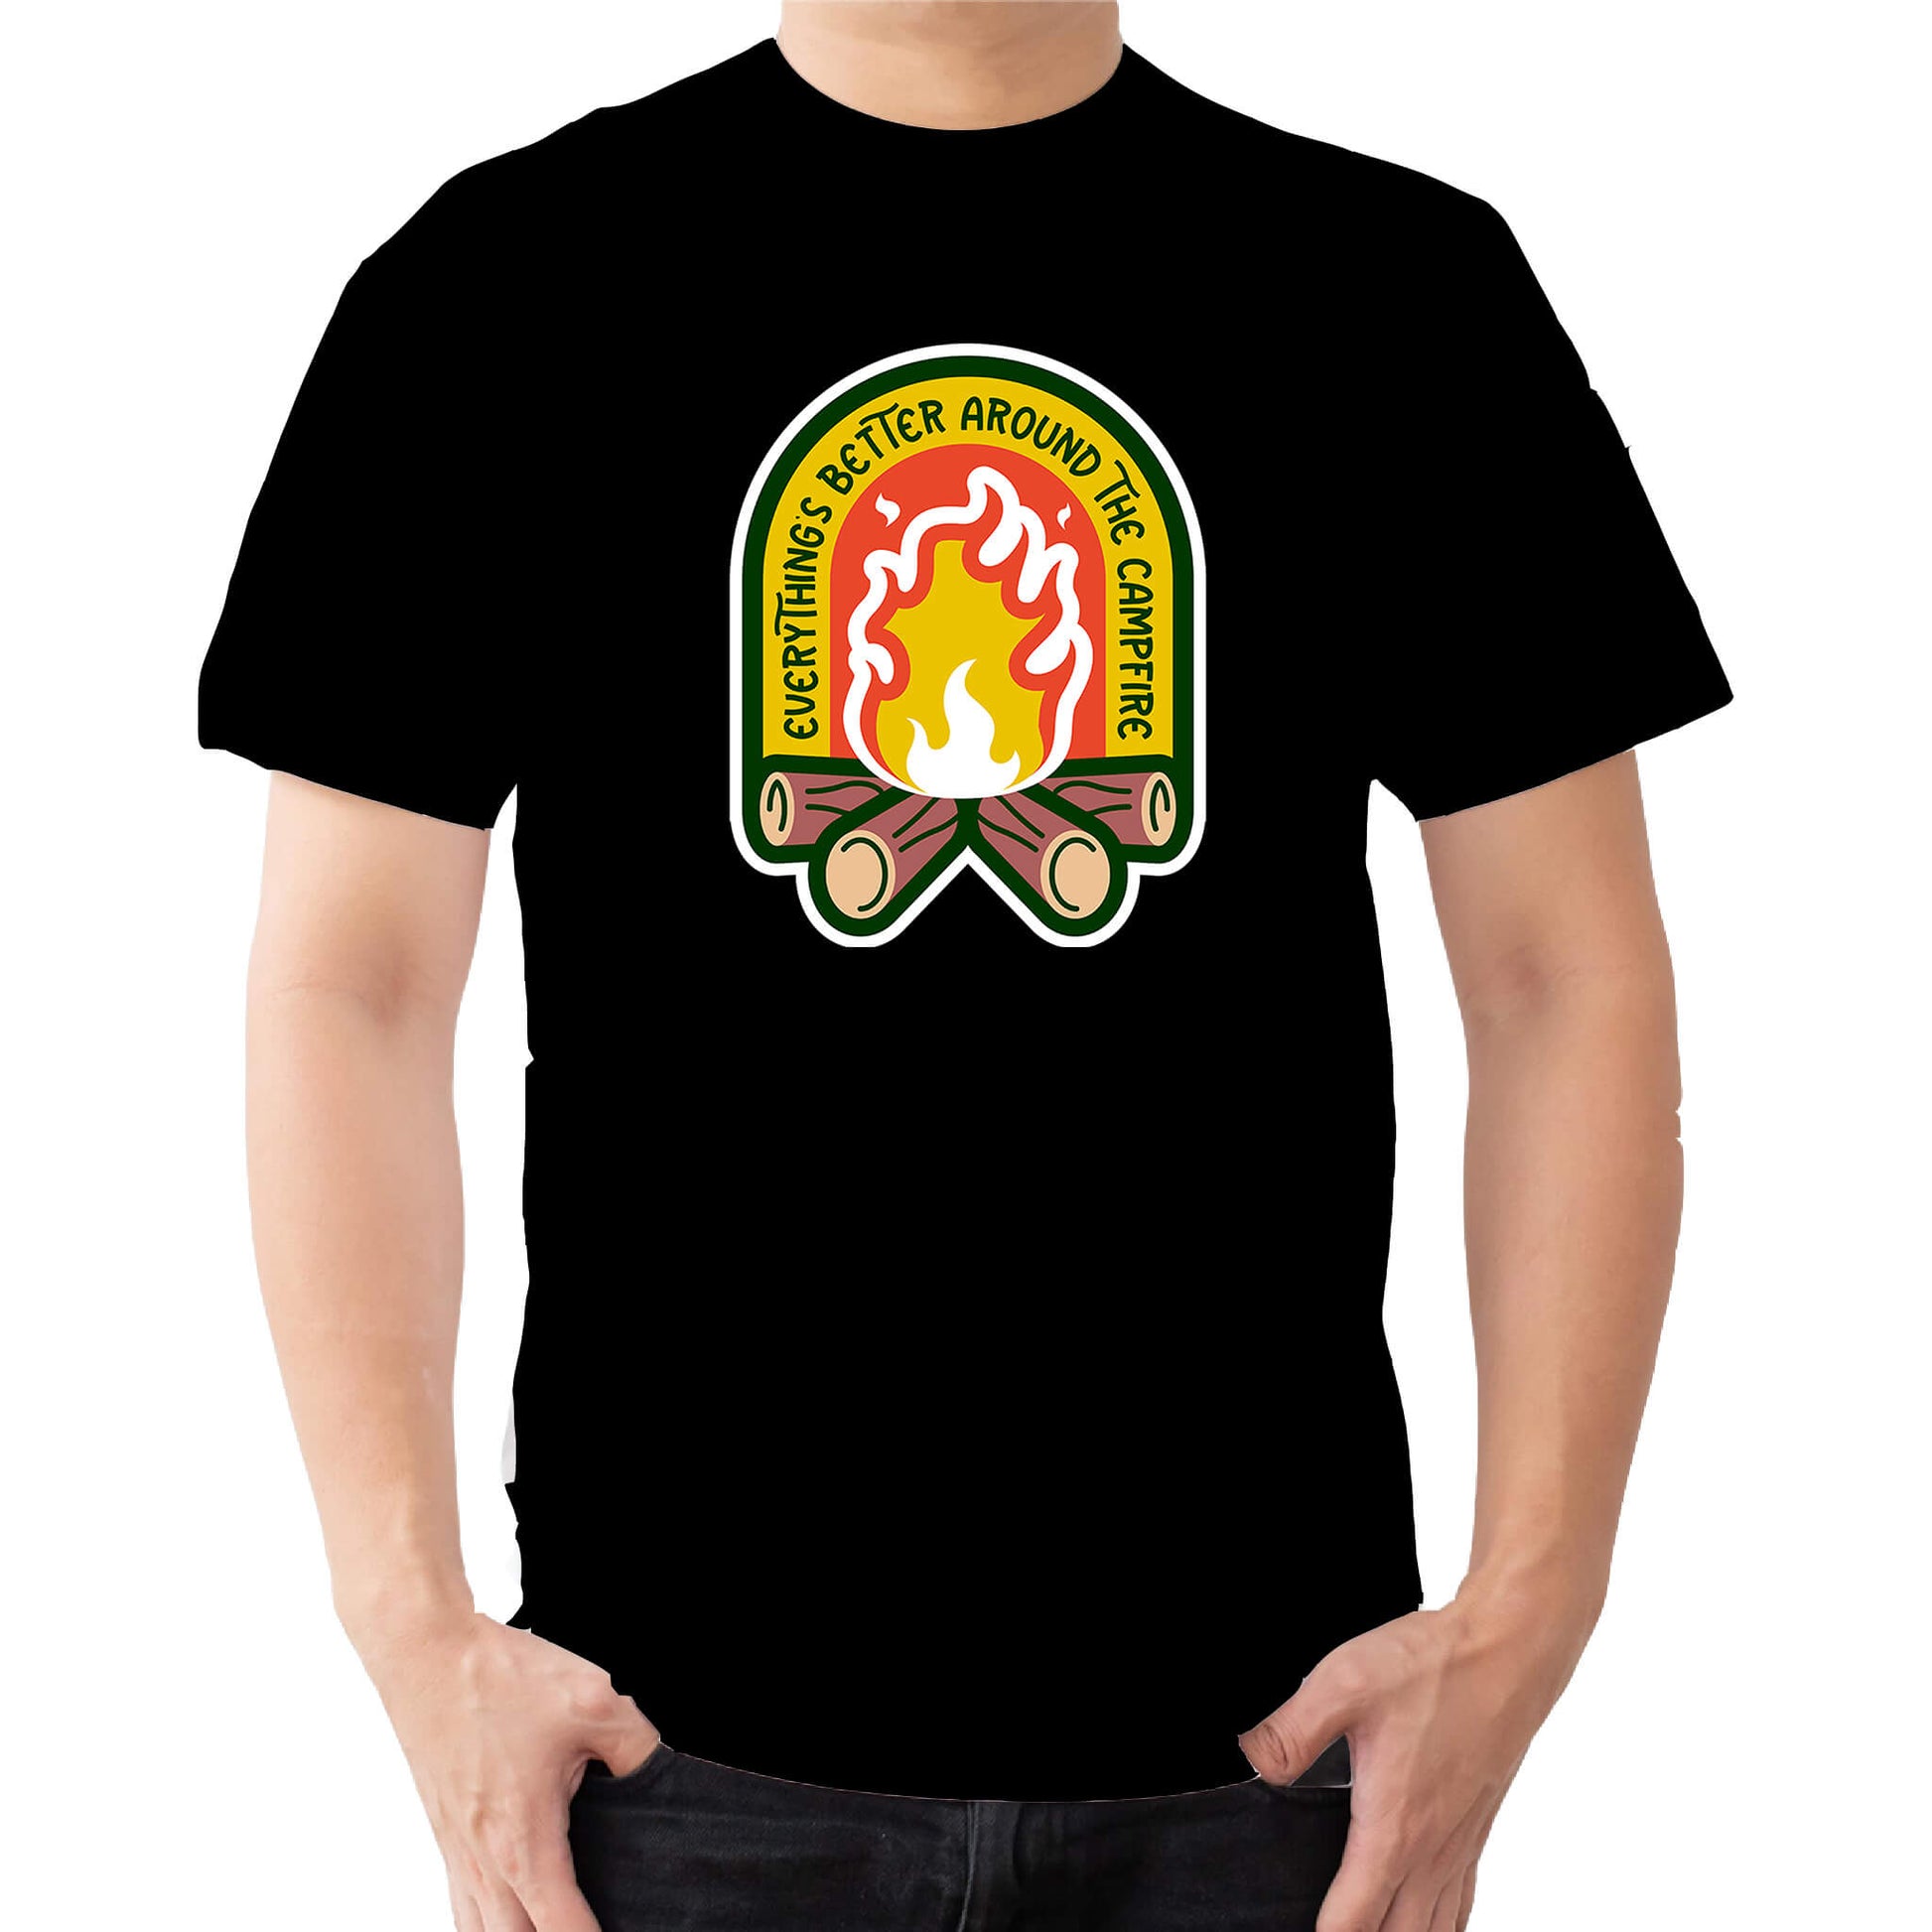 "black Cozy tee featuring a campfire image, perfect for outdoor enthusiasts. Text says: 'Everything is better around the campfire.' Embrace the warmth and camaraderie!"